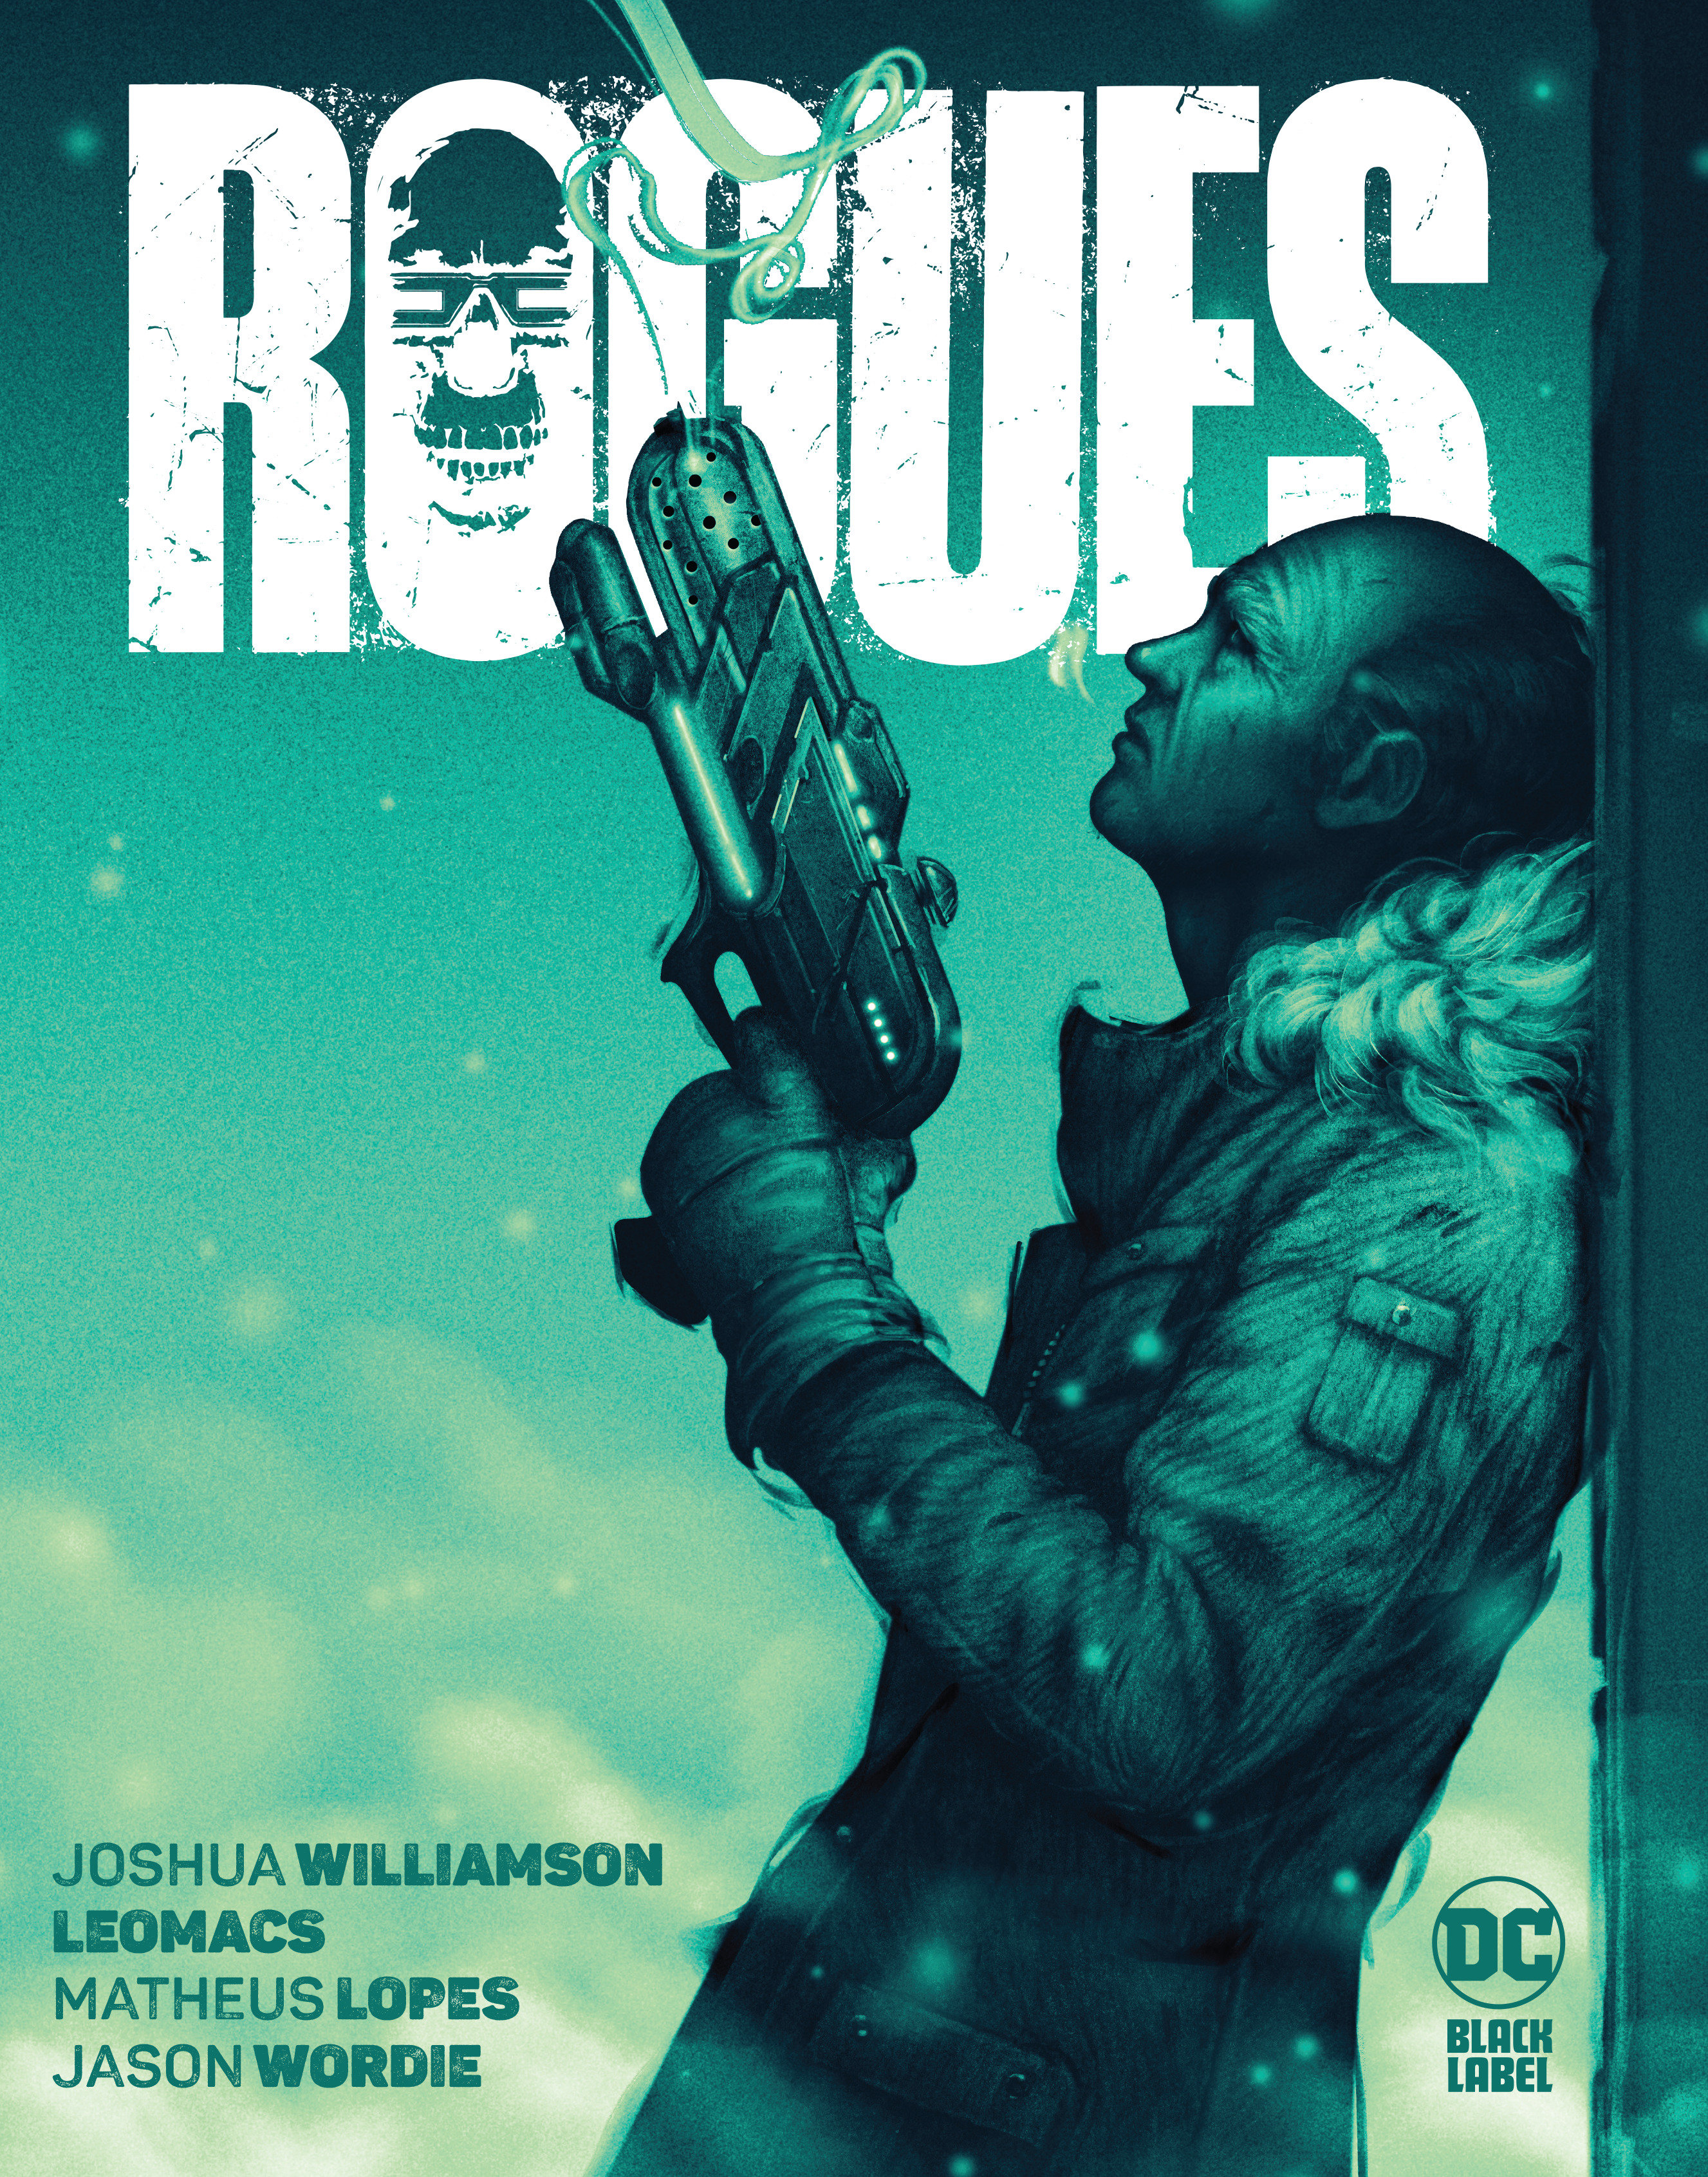 Rogues Hardcover